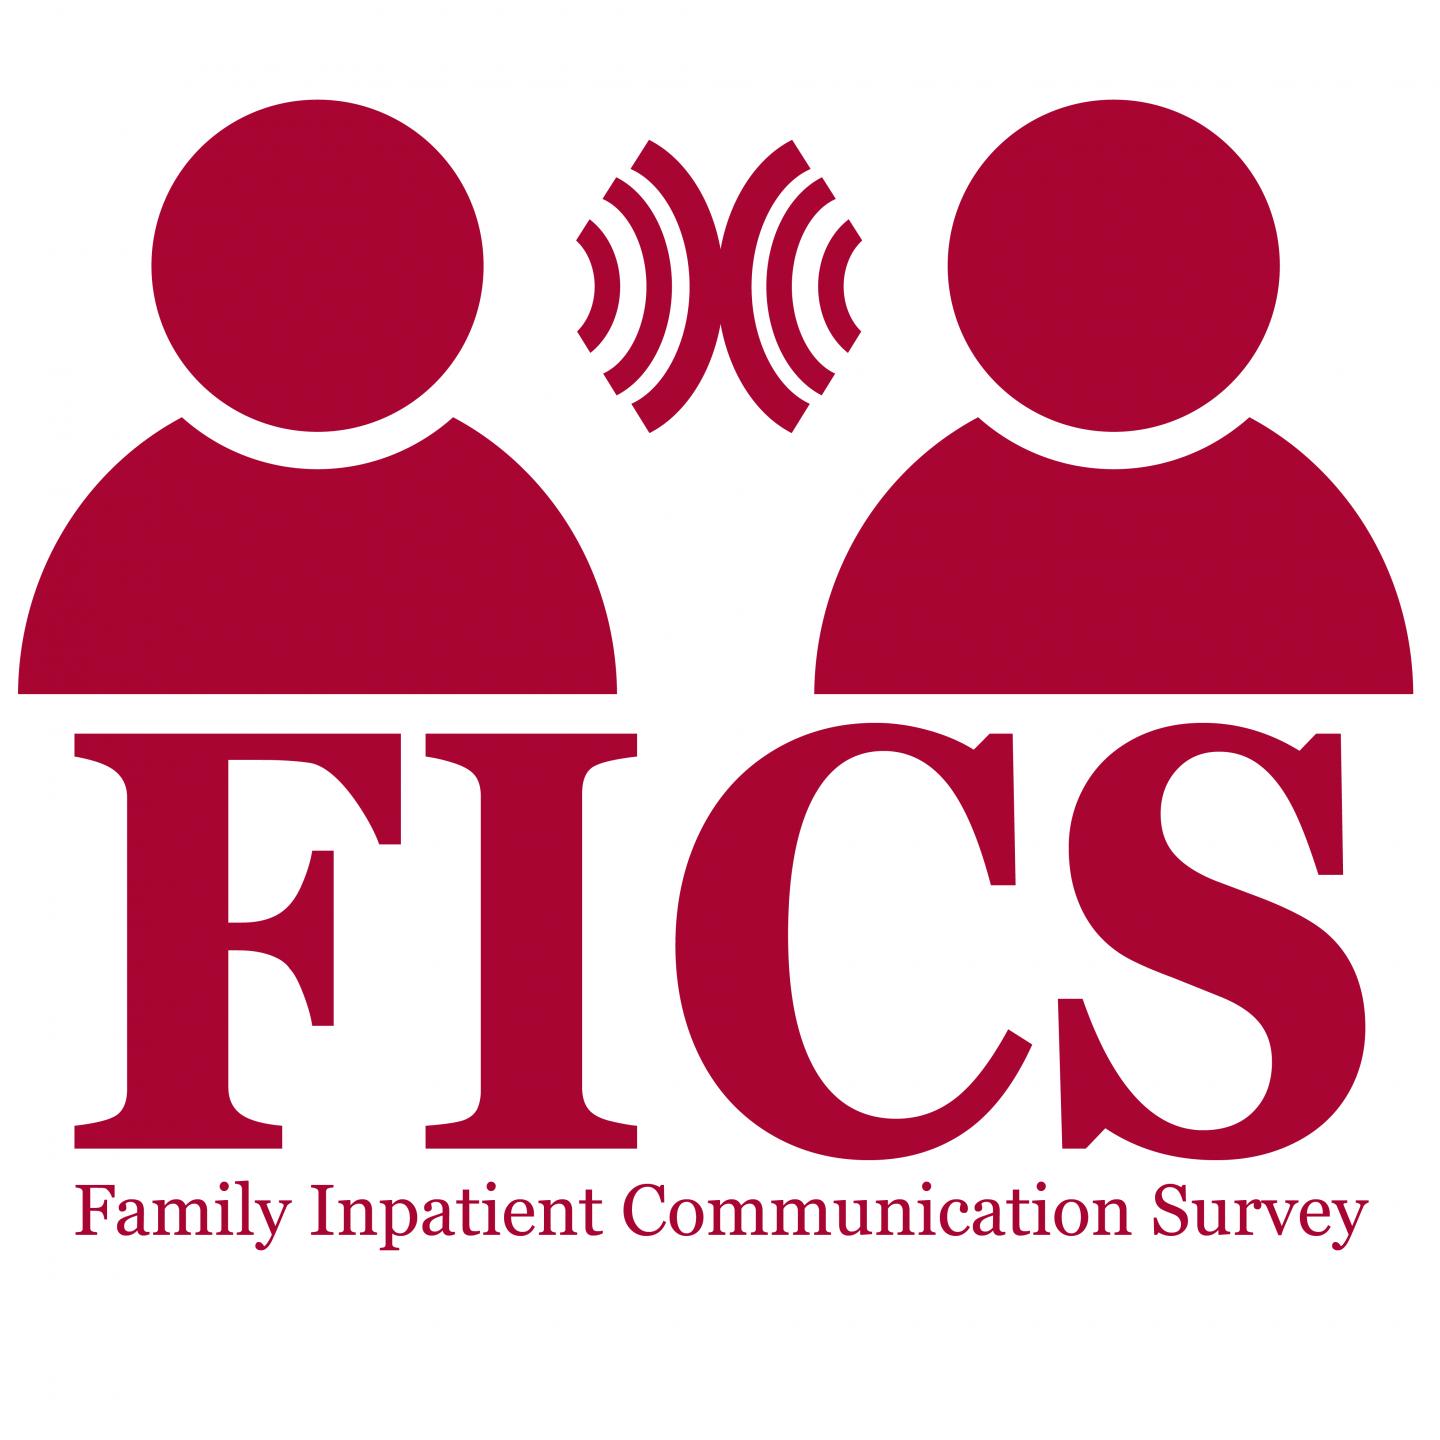 Family Inpatient Communication Survey, Indiana University Center for Aging Research